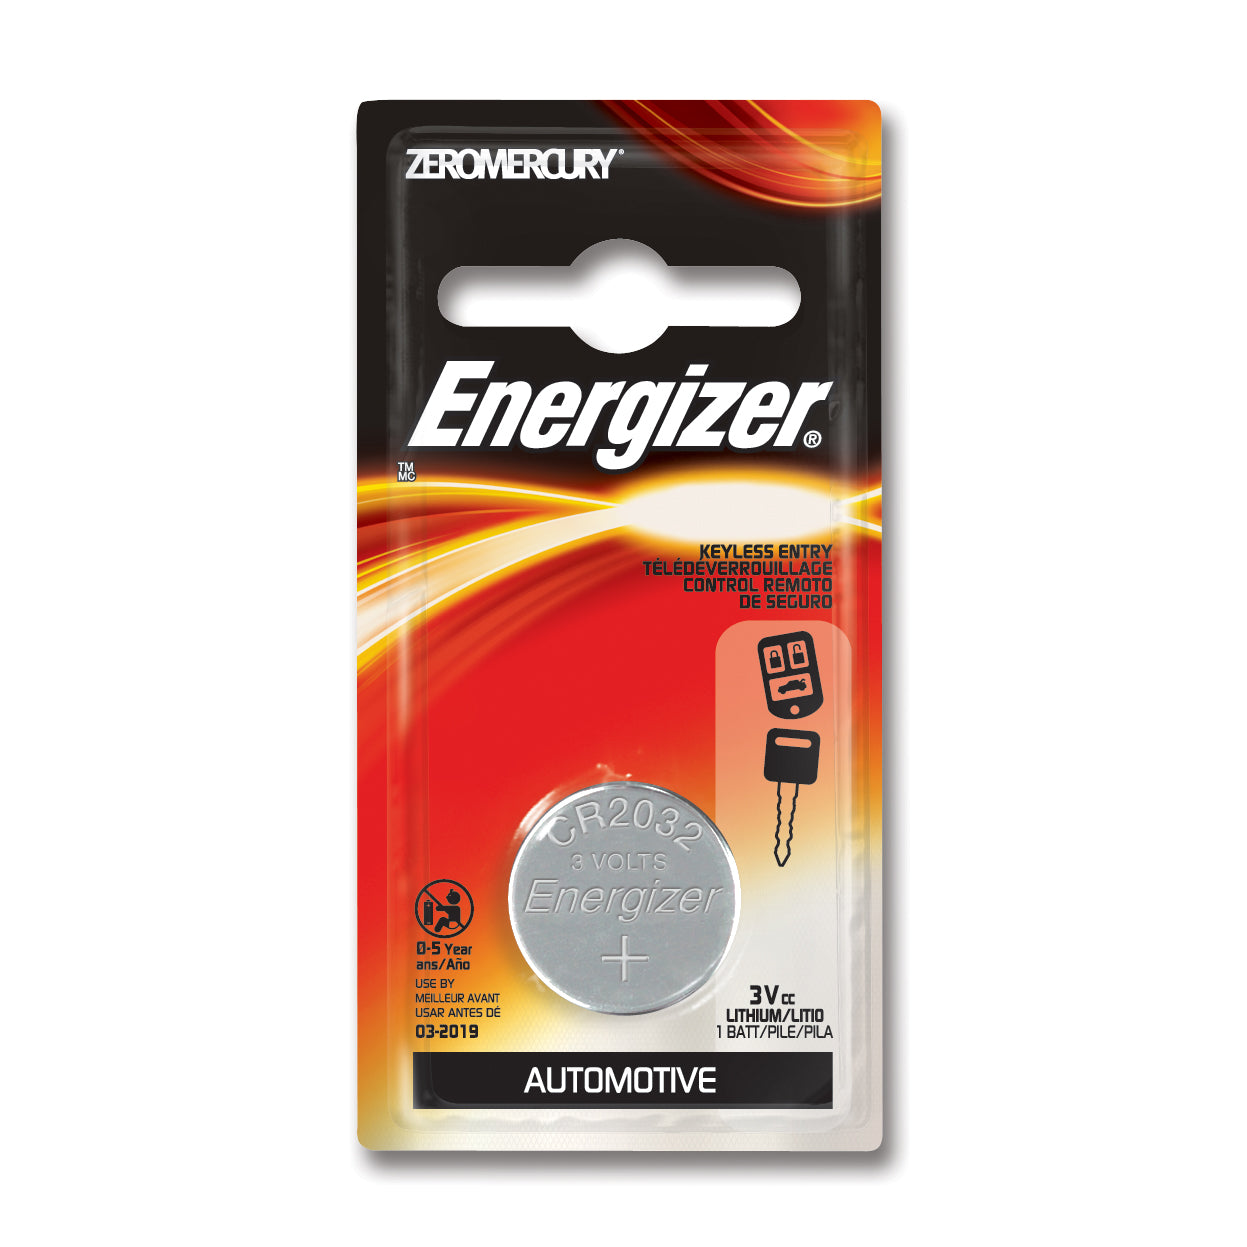 (1) Type 2450 Energizer Lithium Battery in Retail Packaging